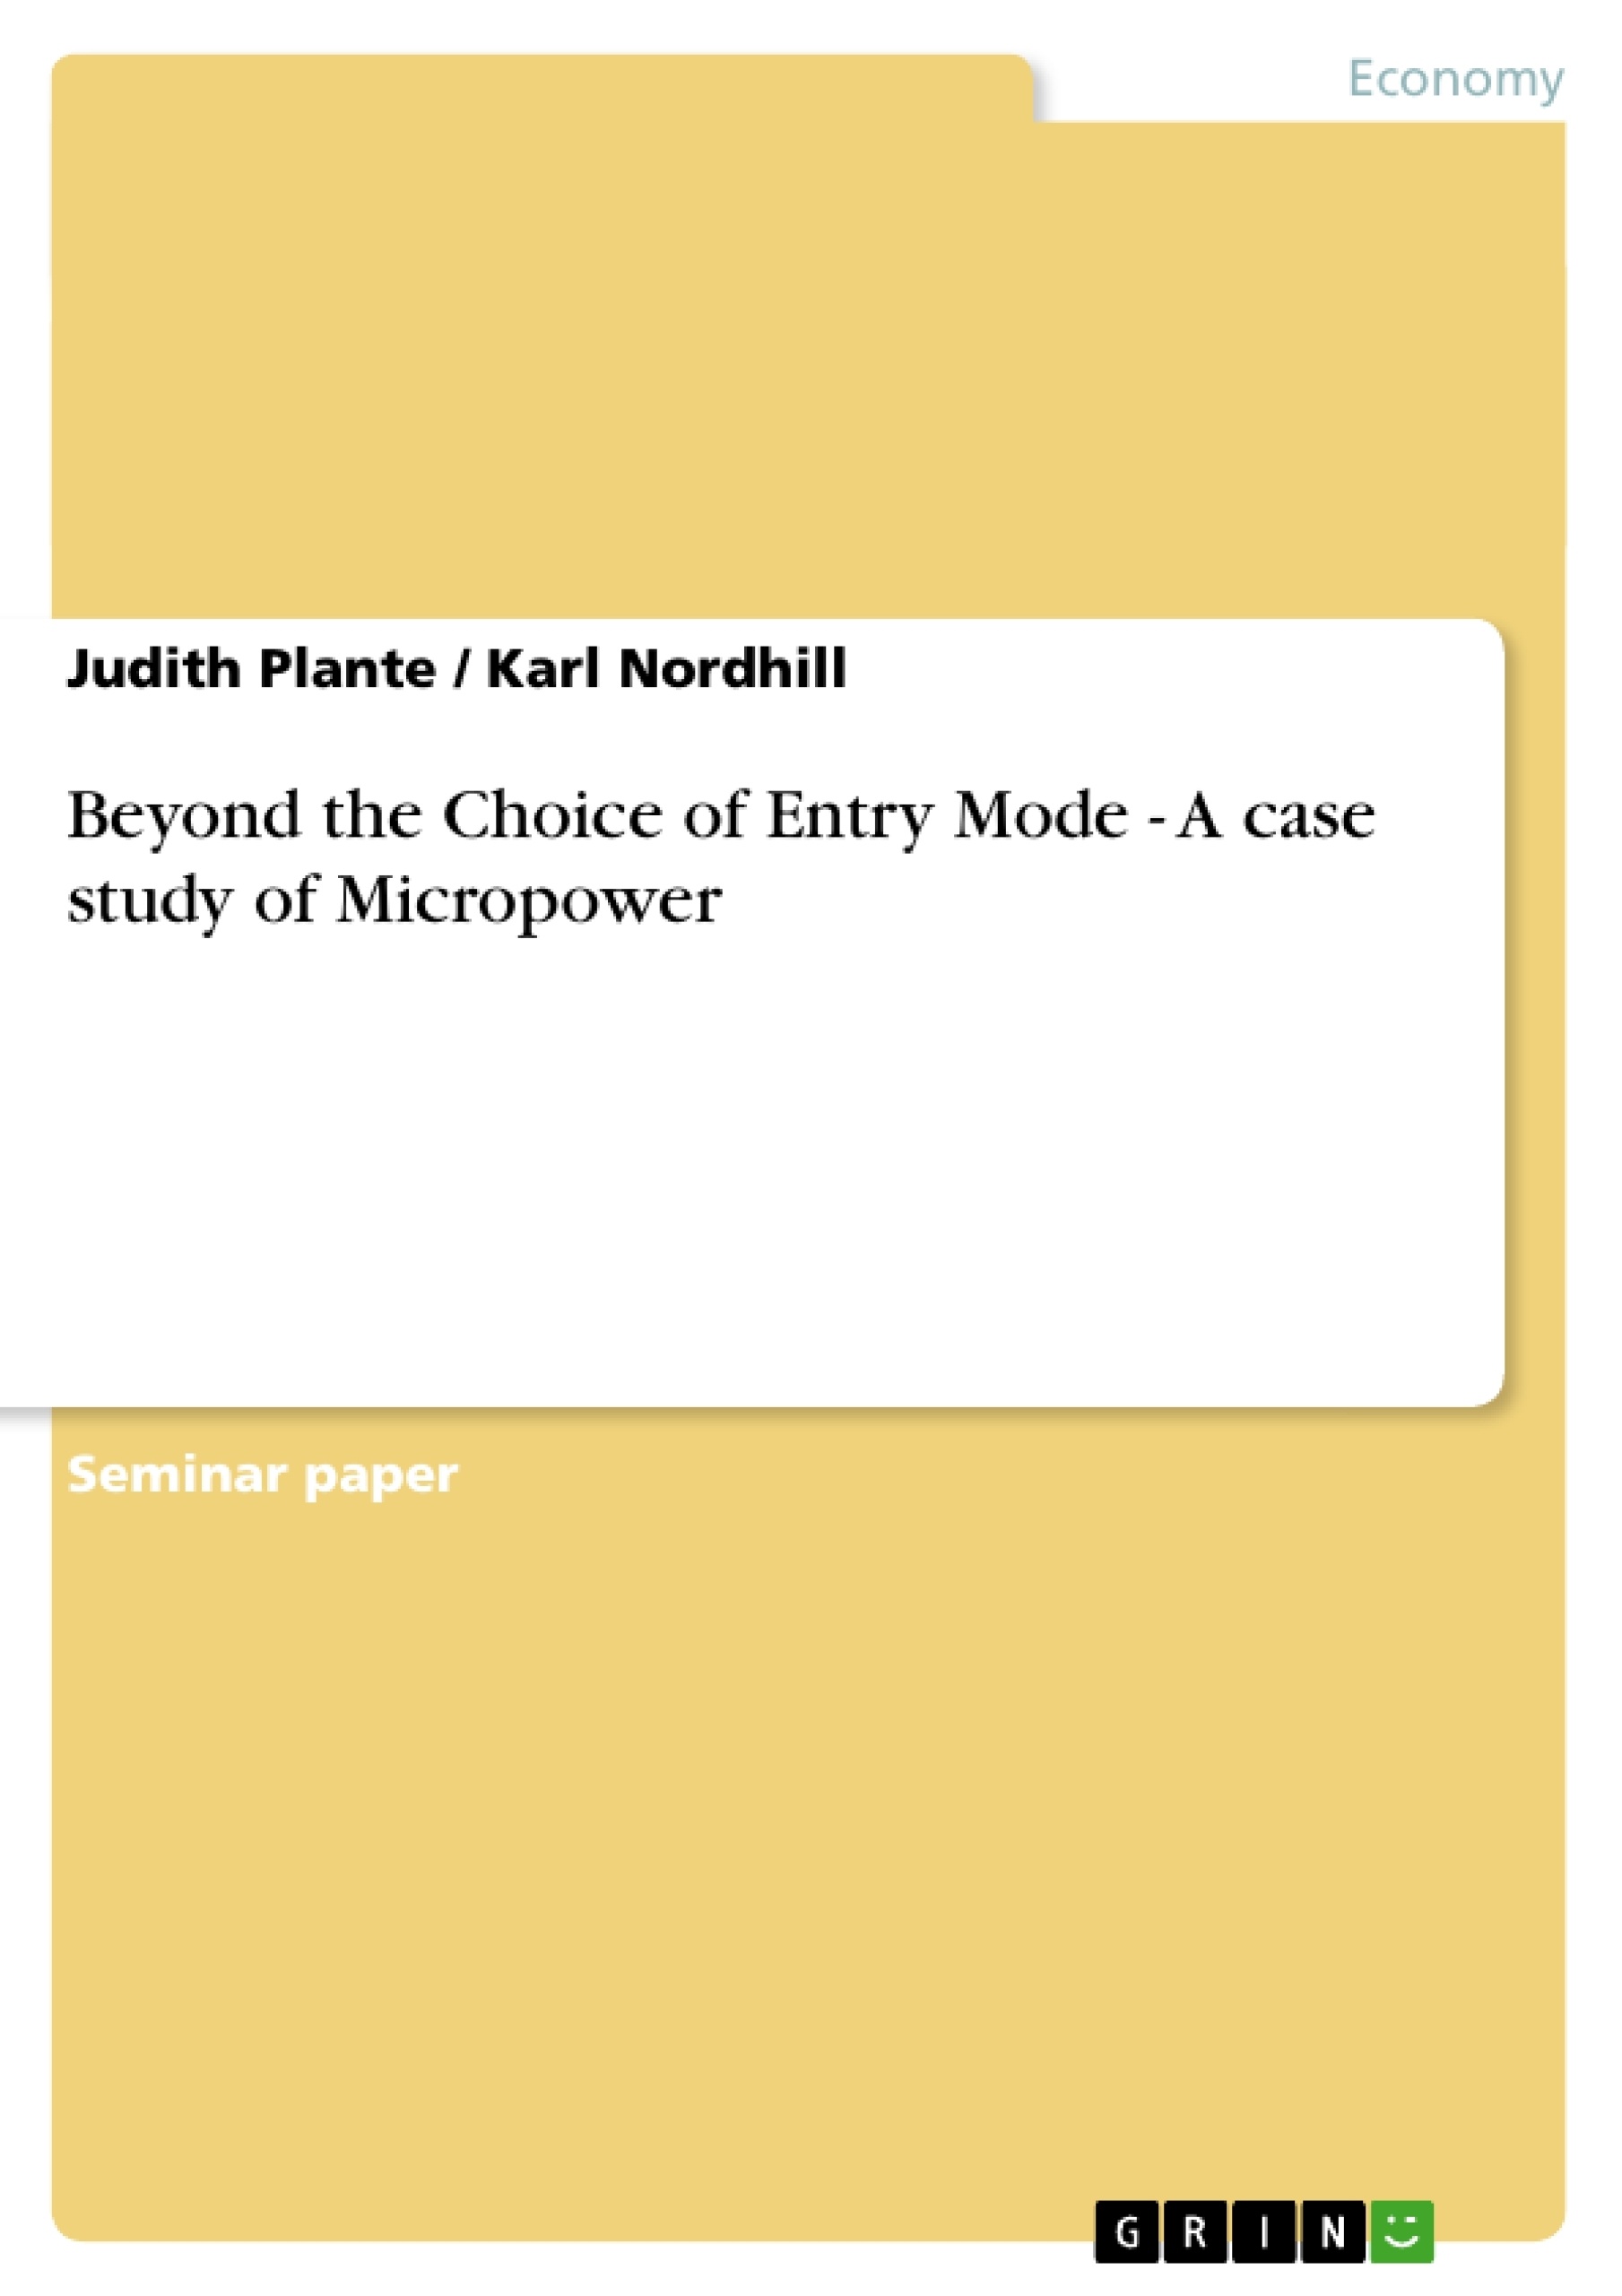 Title: Beyond the Choice of Entry Mode - A case study of Micropower